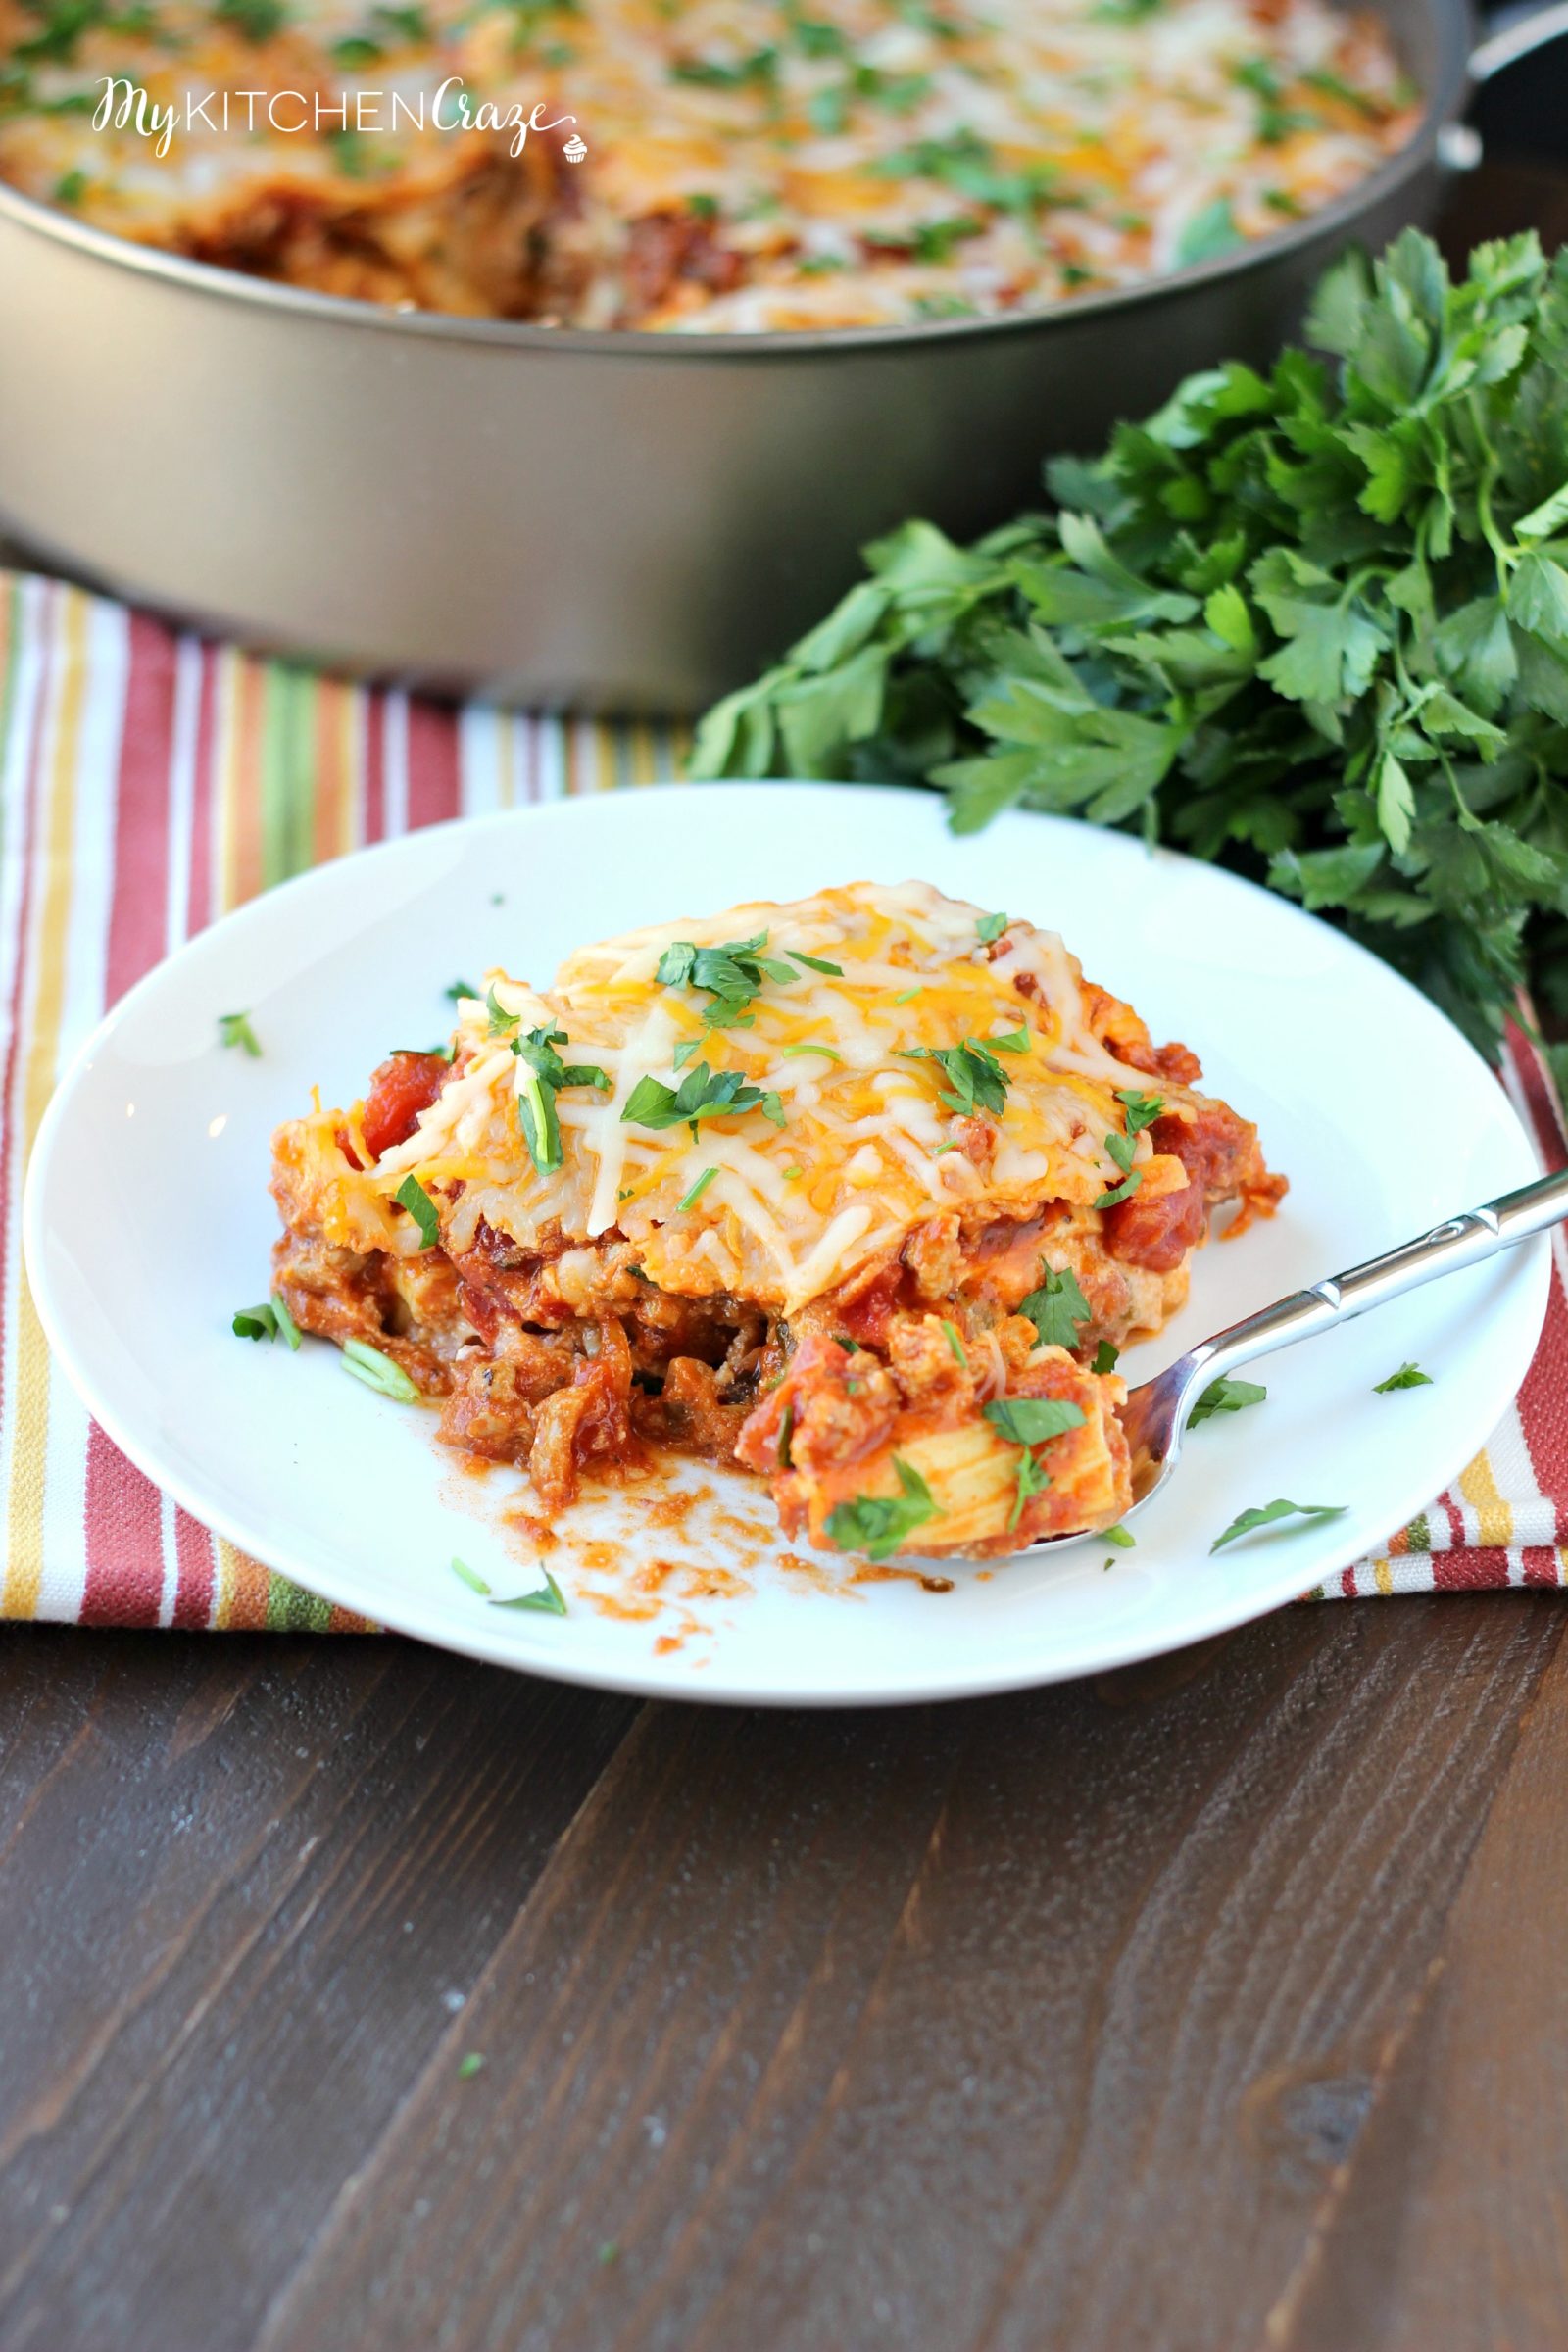 Simple Skillet Lasagna ~ mykitchencraze.com ~ Need an easy meal for dinner tonight? This skillet lasagna will be on your table in no time. Delicious!